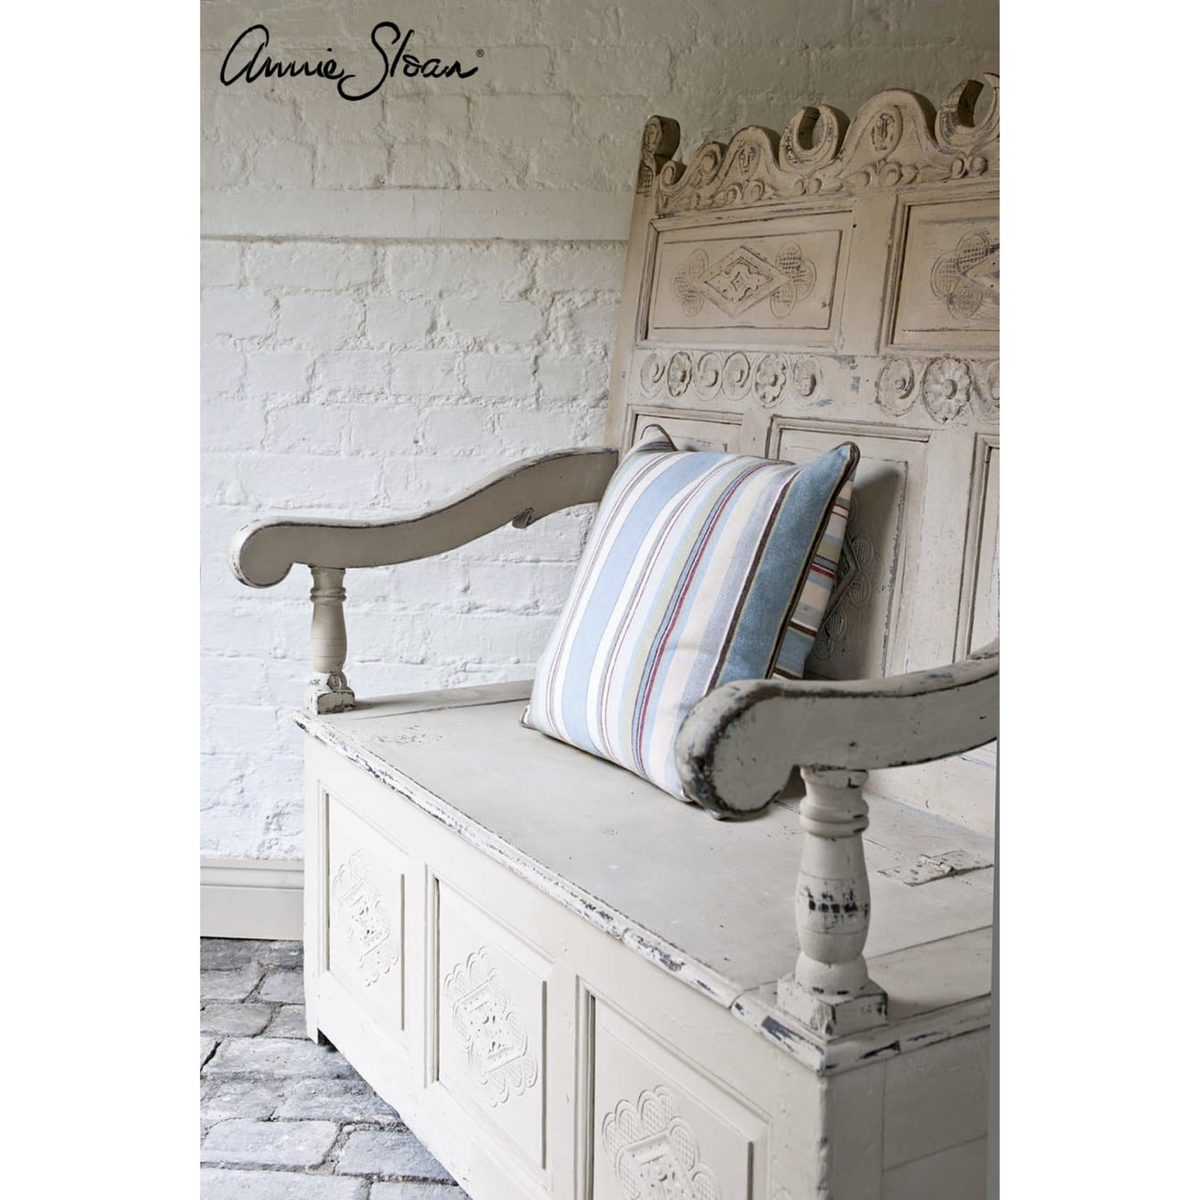 Annie Sloan CHALK PAINT® – Country Grey